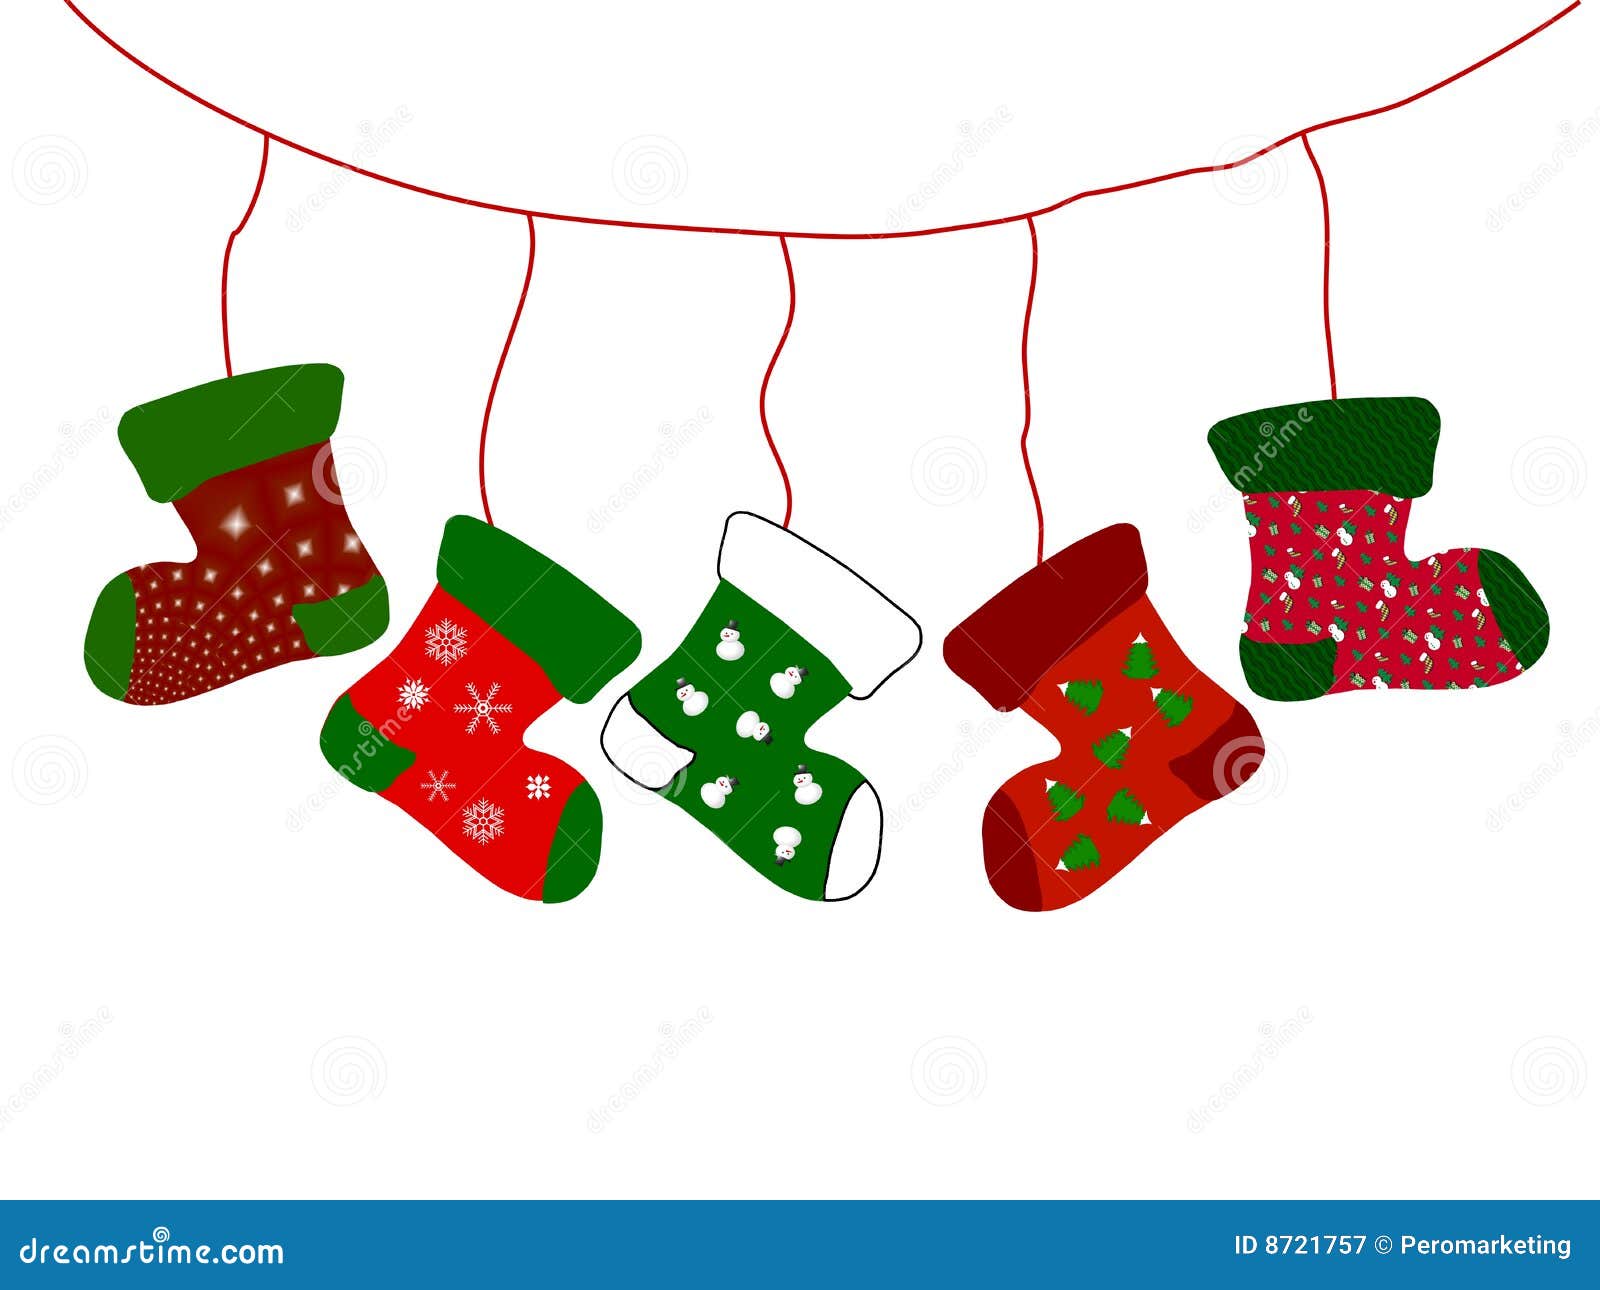 clipart christmas stockings images - photo #29